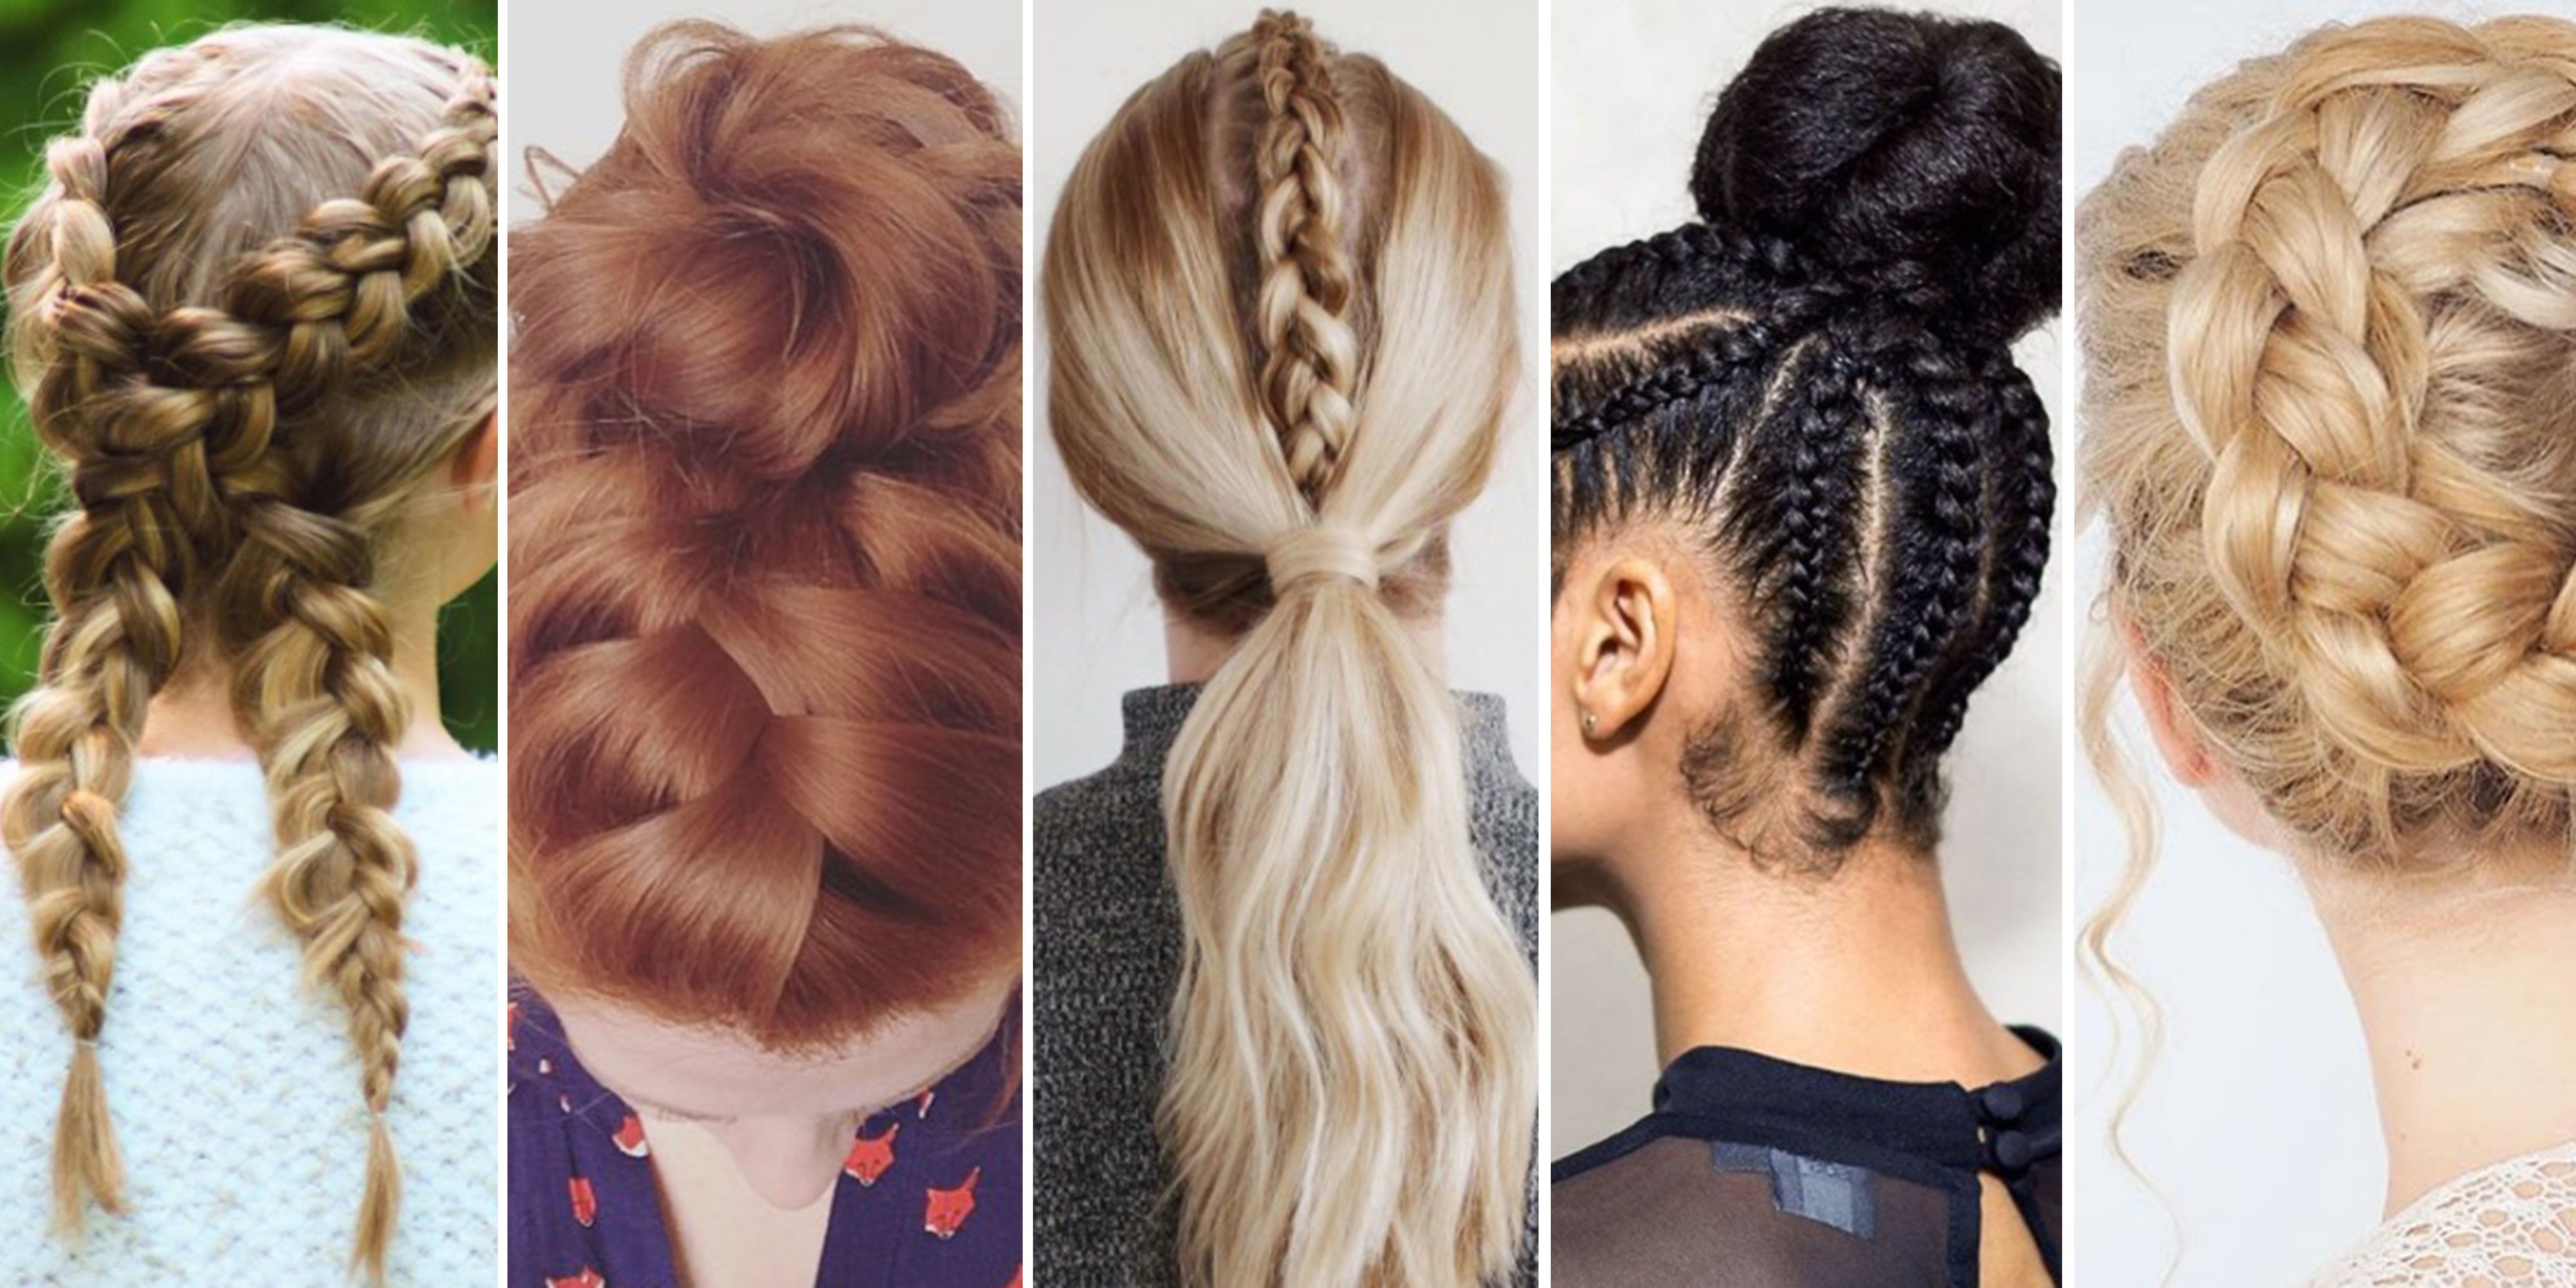 Gym Hairstyles: Cute & Easy Workout Hairstyles - Luxy® Hair